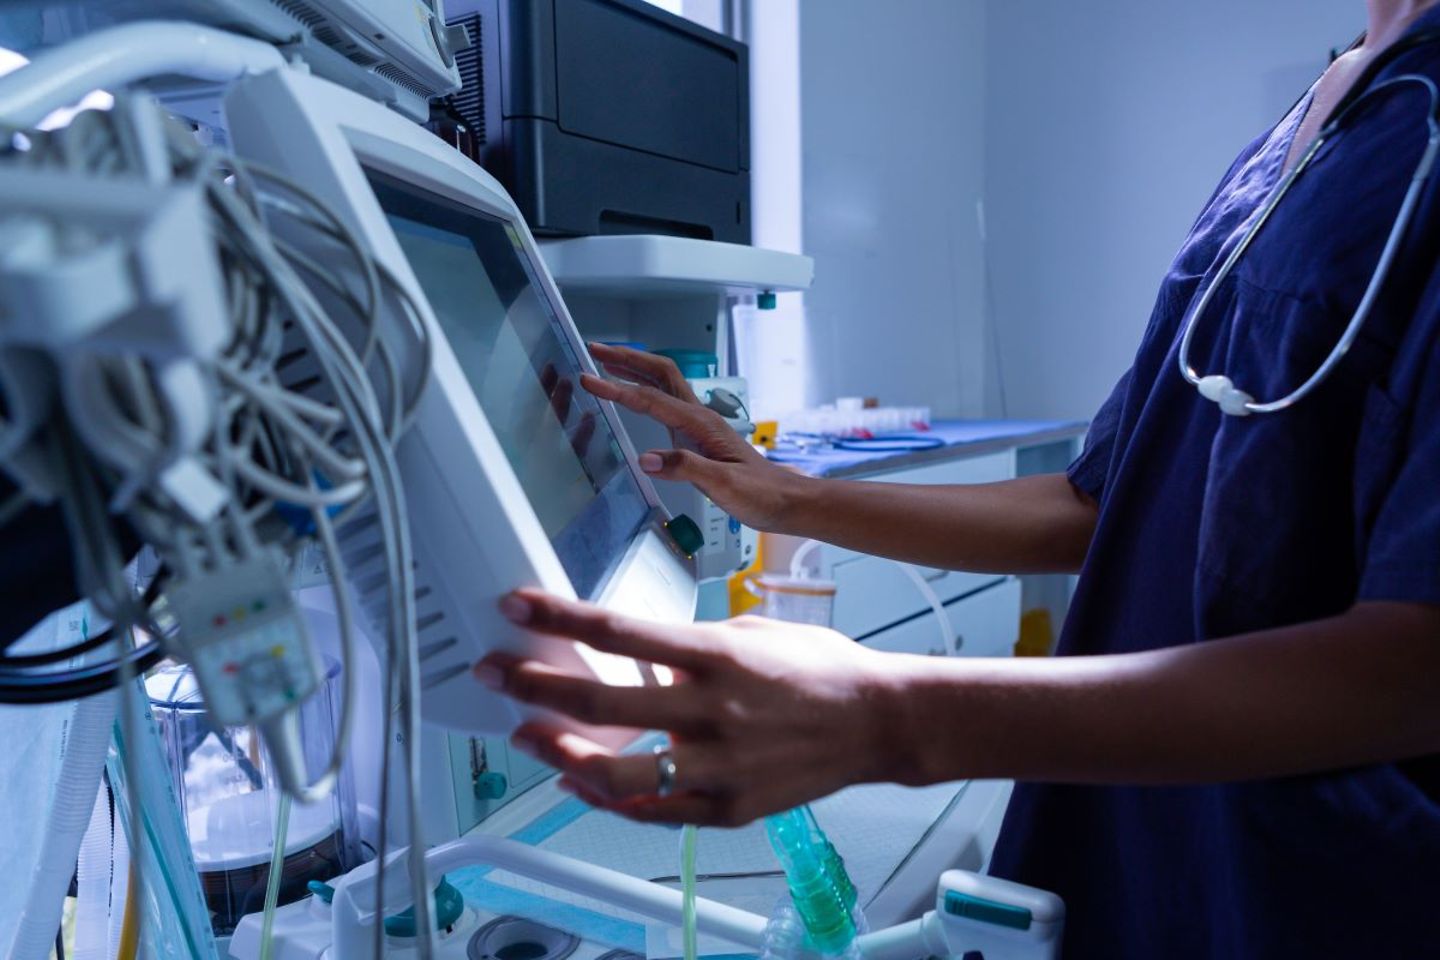 Hospital equipment, doctor, staff, internet of things (IoT)